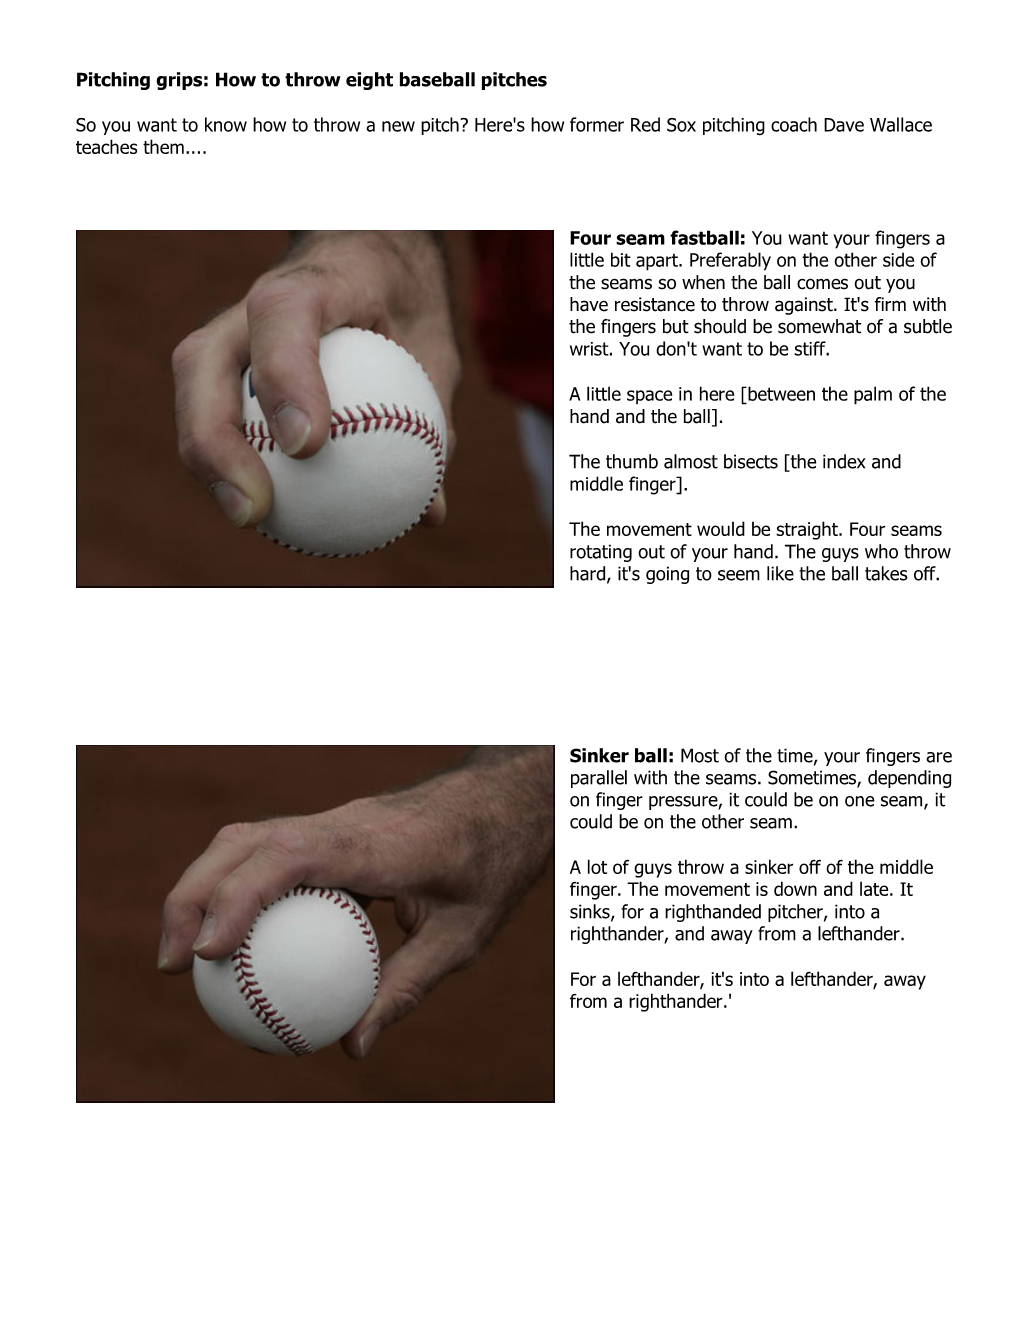 Pitching Grips: How to Throw Eight Baseball Pitches So You Want To